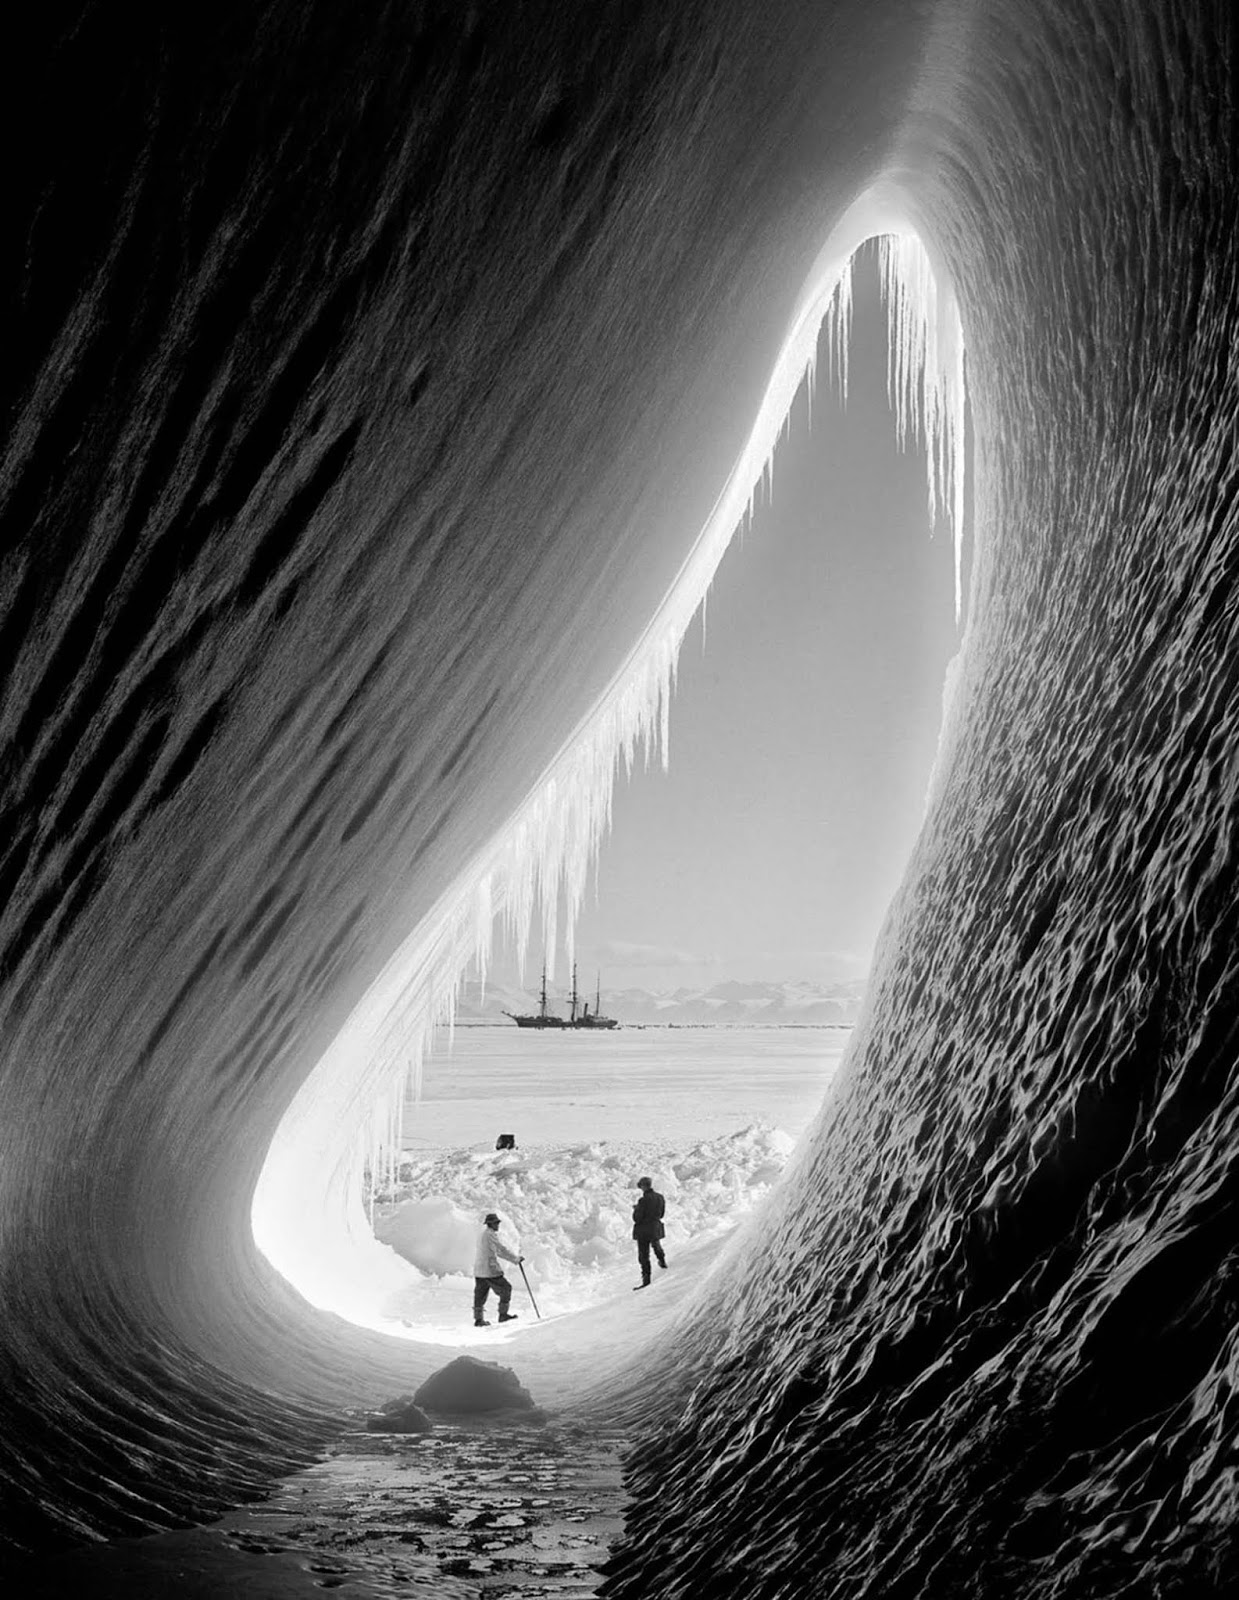 Geologist Thomas Griffith Taylor and meteorologist Charles Wright look out towards the Terra Nova from inside an ice grotto. January 5, 1911.